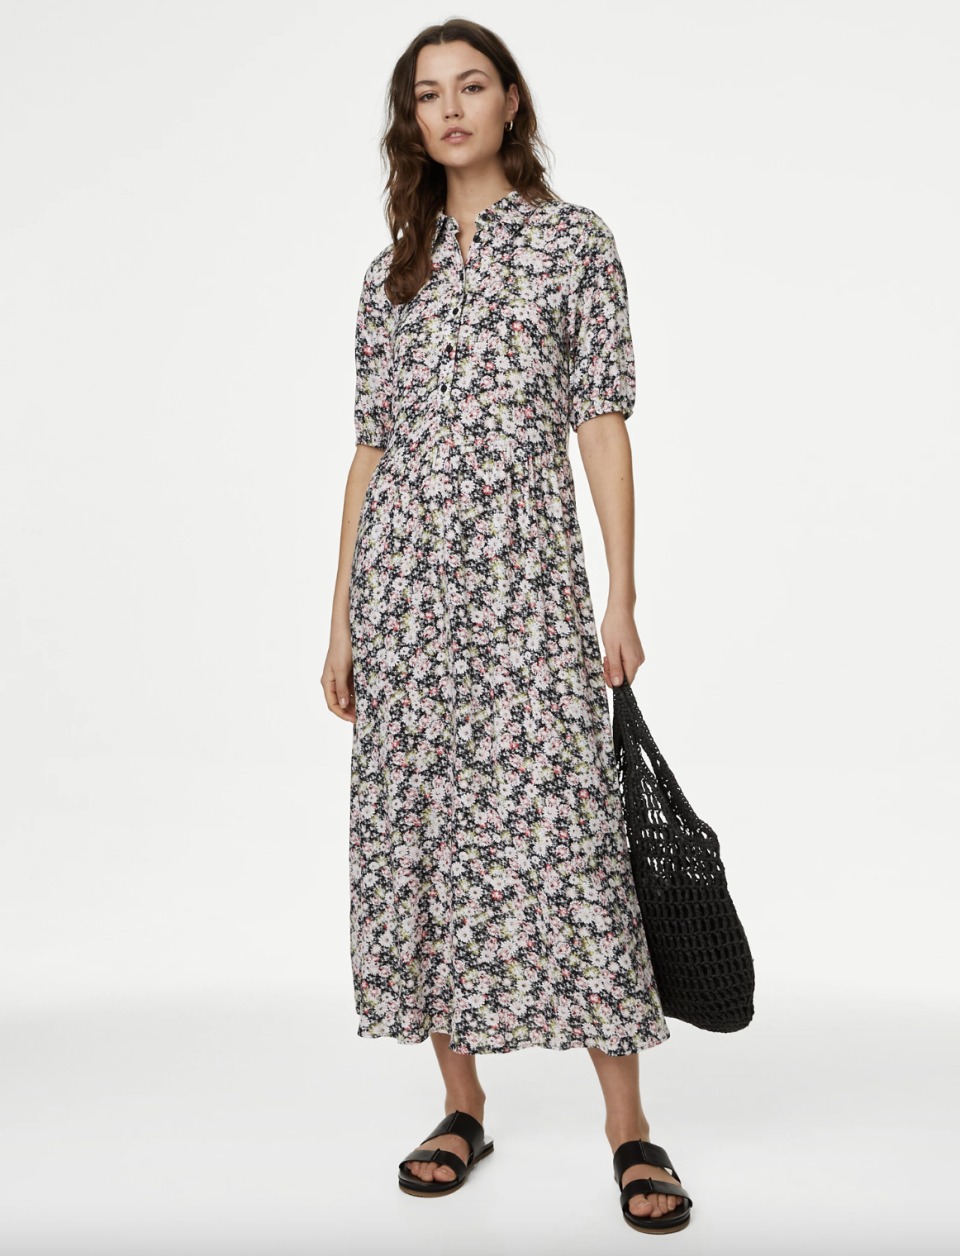 If you love an understated floral print, you'll love this dress. (Marks & Spencer)